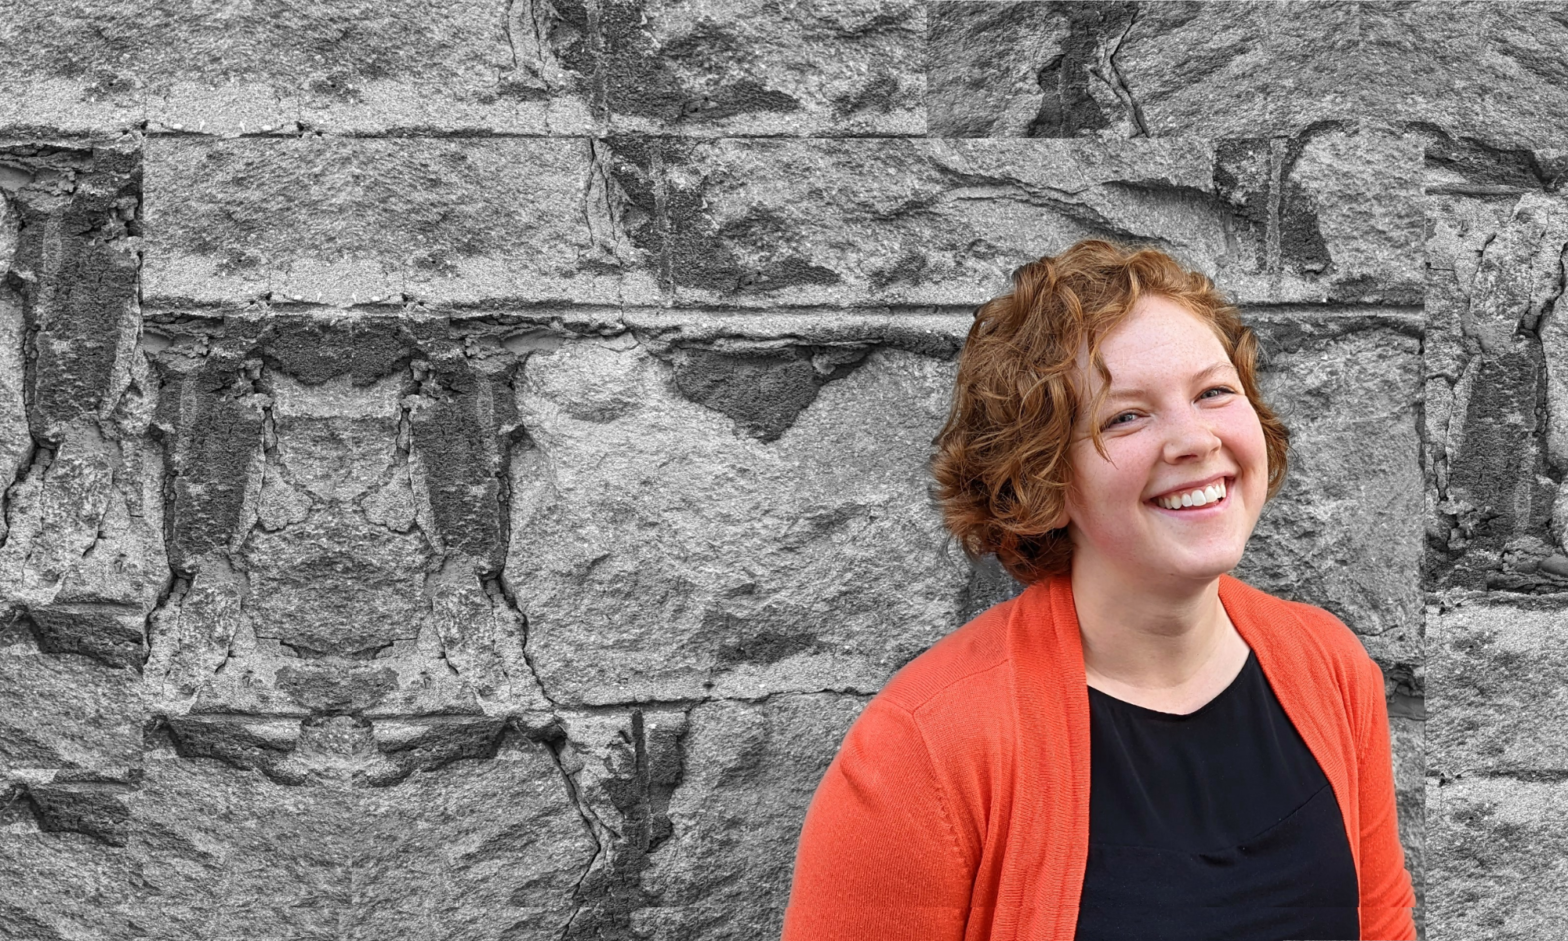 Nicola Schaan, occupational therapist has short curly red hair, freckles, and is smiling wearing an pinky orange cardigan in front of a brick wall